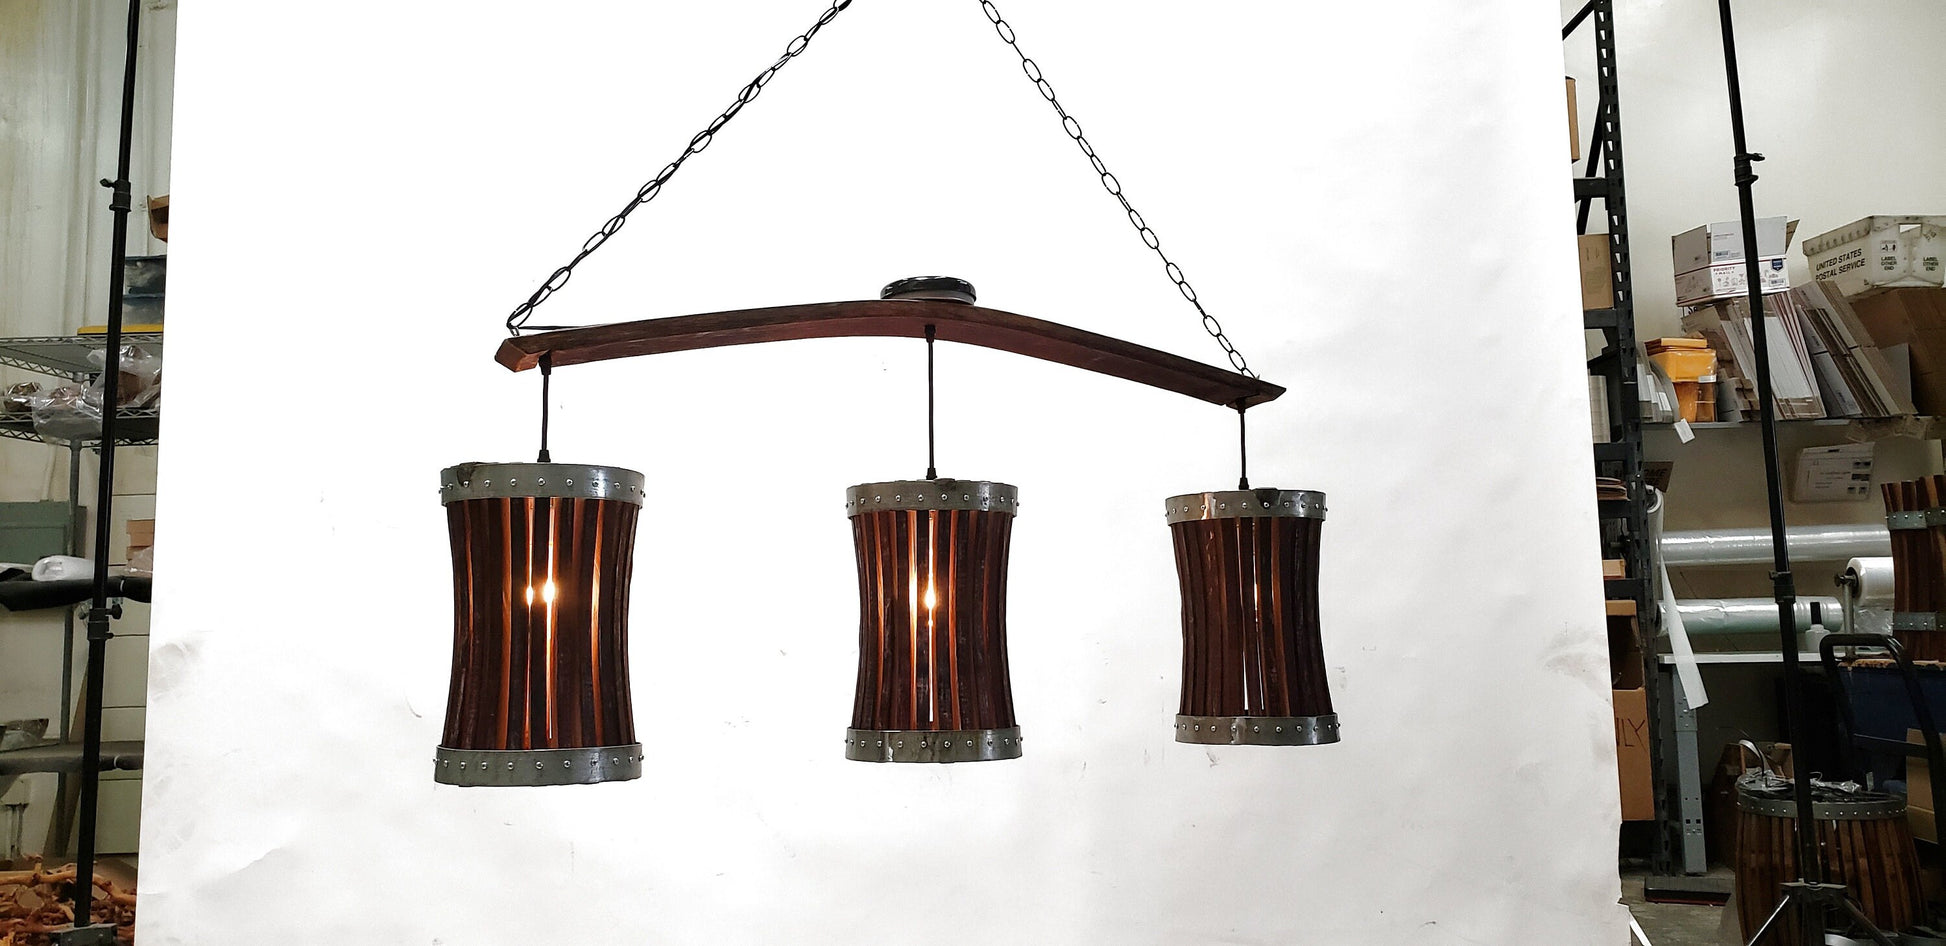 Wine Barrel Chandelier - Cubeta - with Triple Pannier Pendants Made entirely from Retired CA Wine Barrels. 100% Recycled!